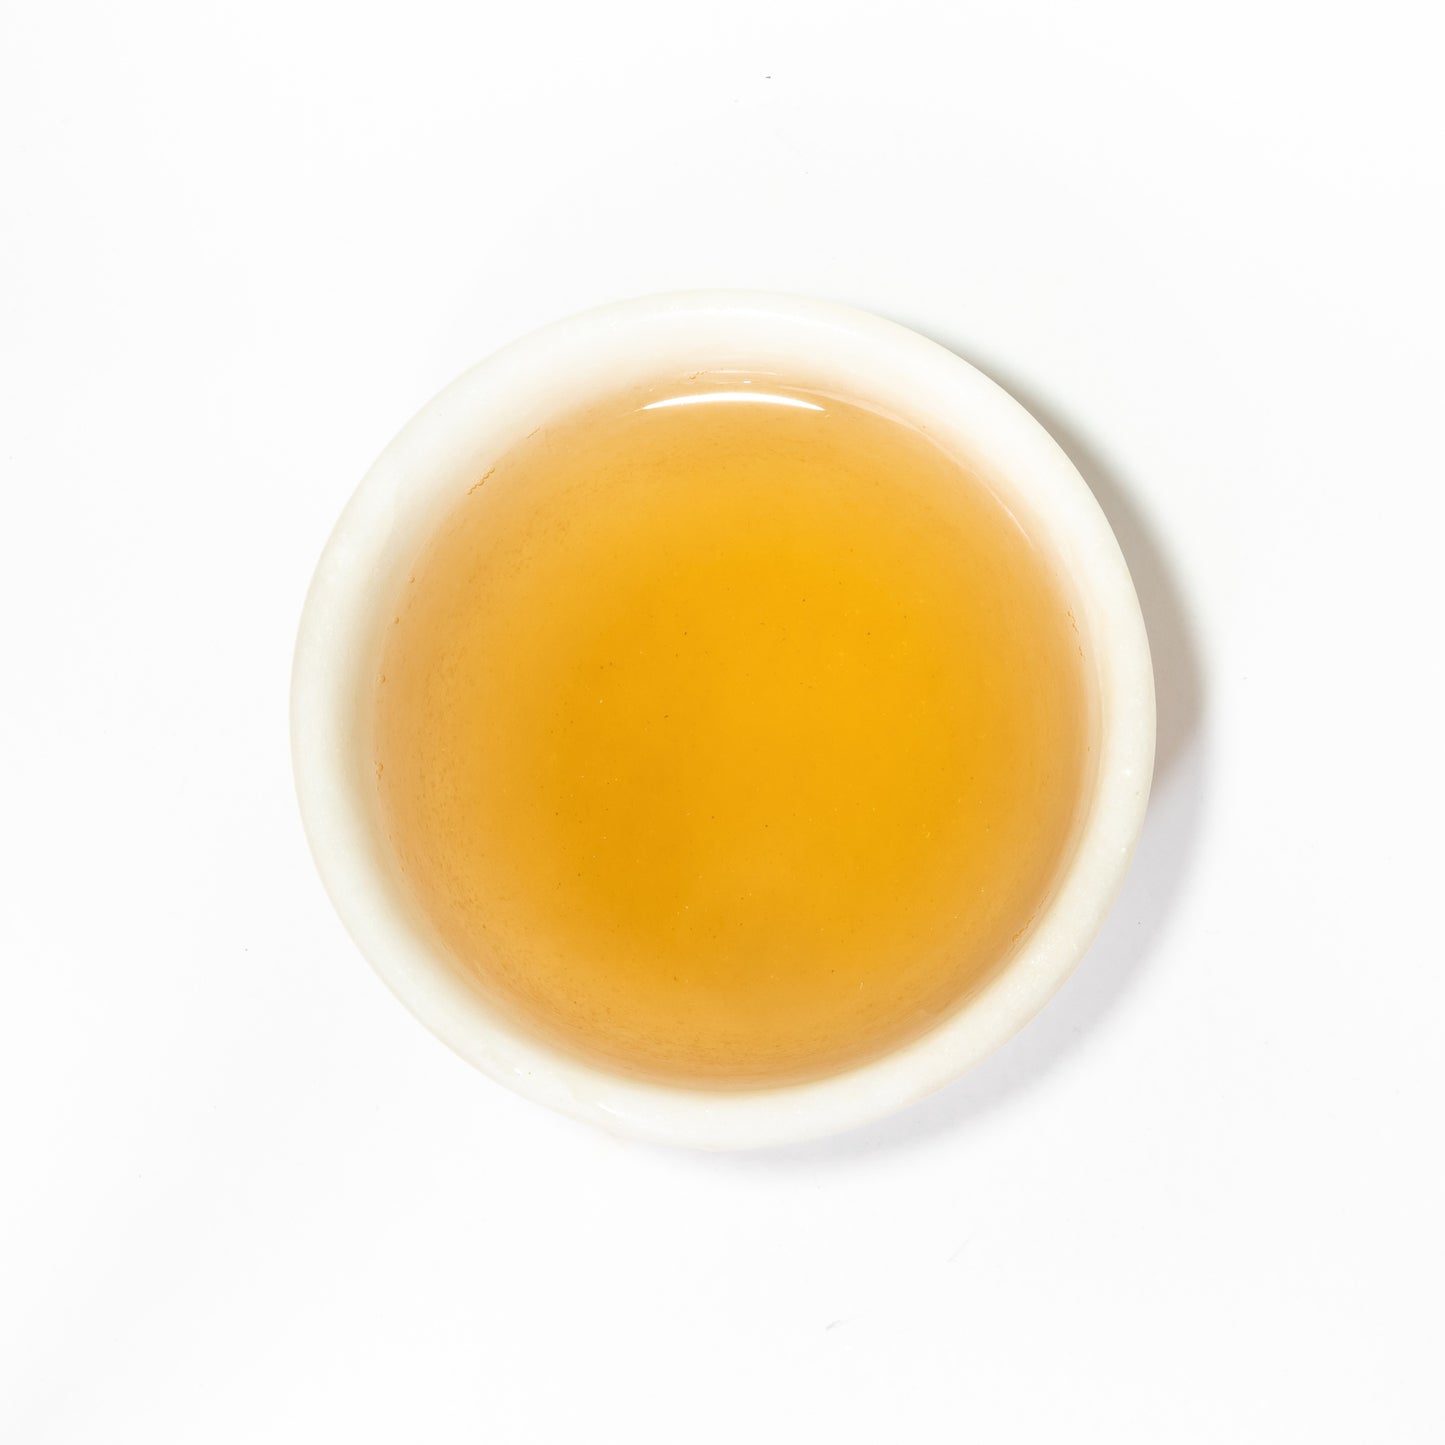 Bud of Rose with White Tea